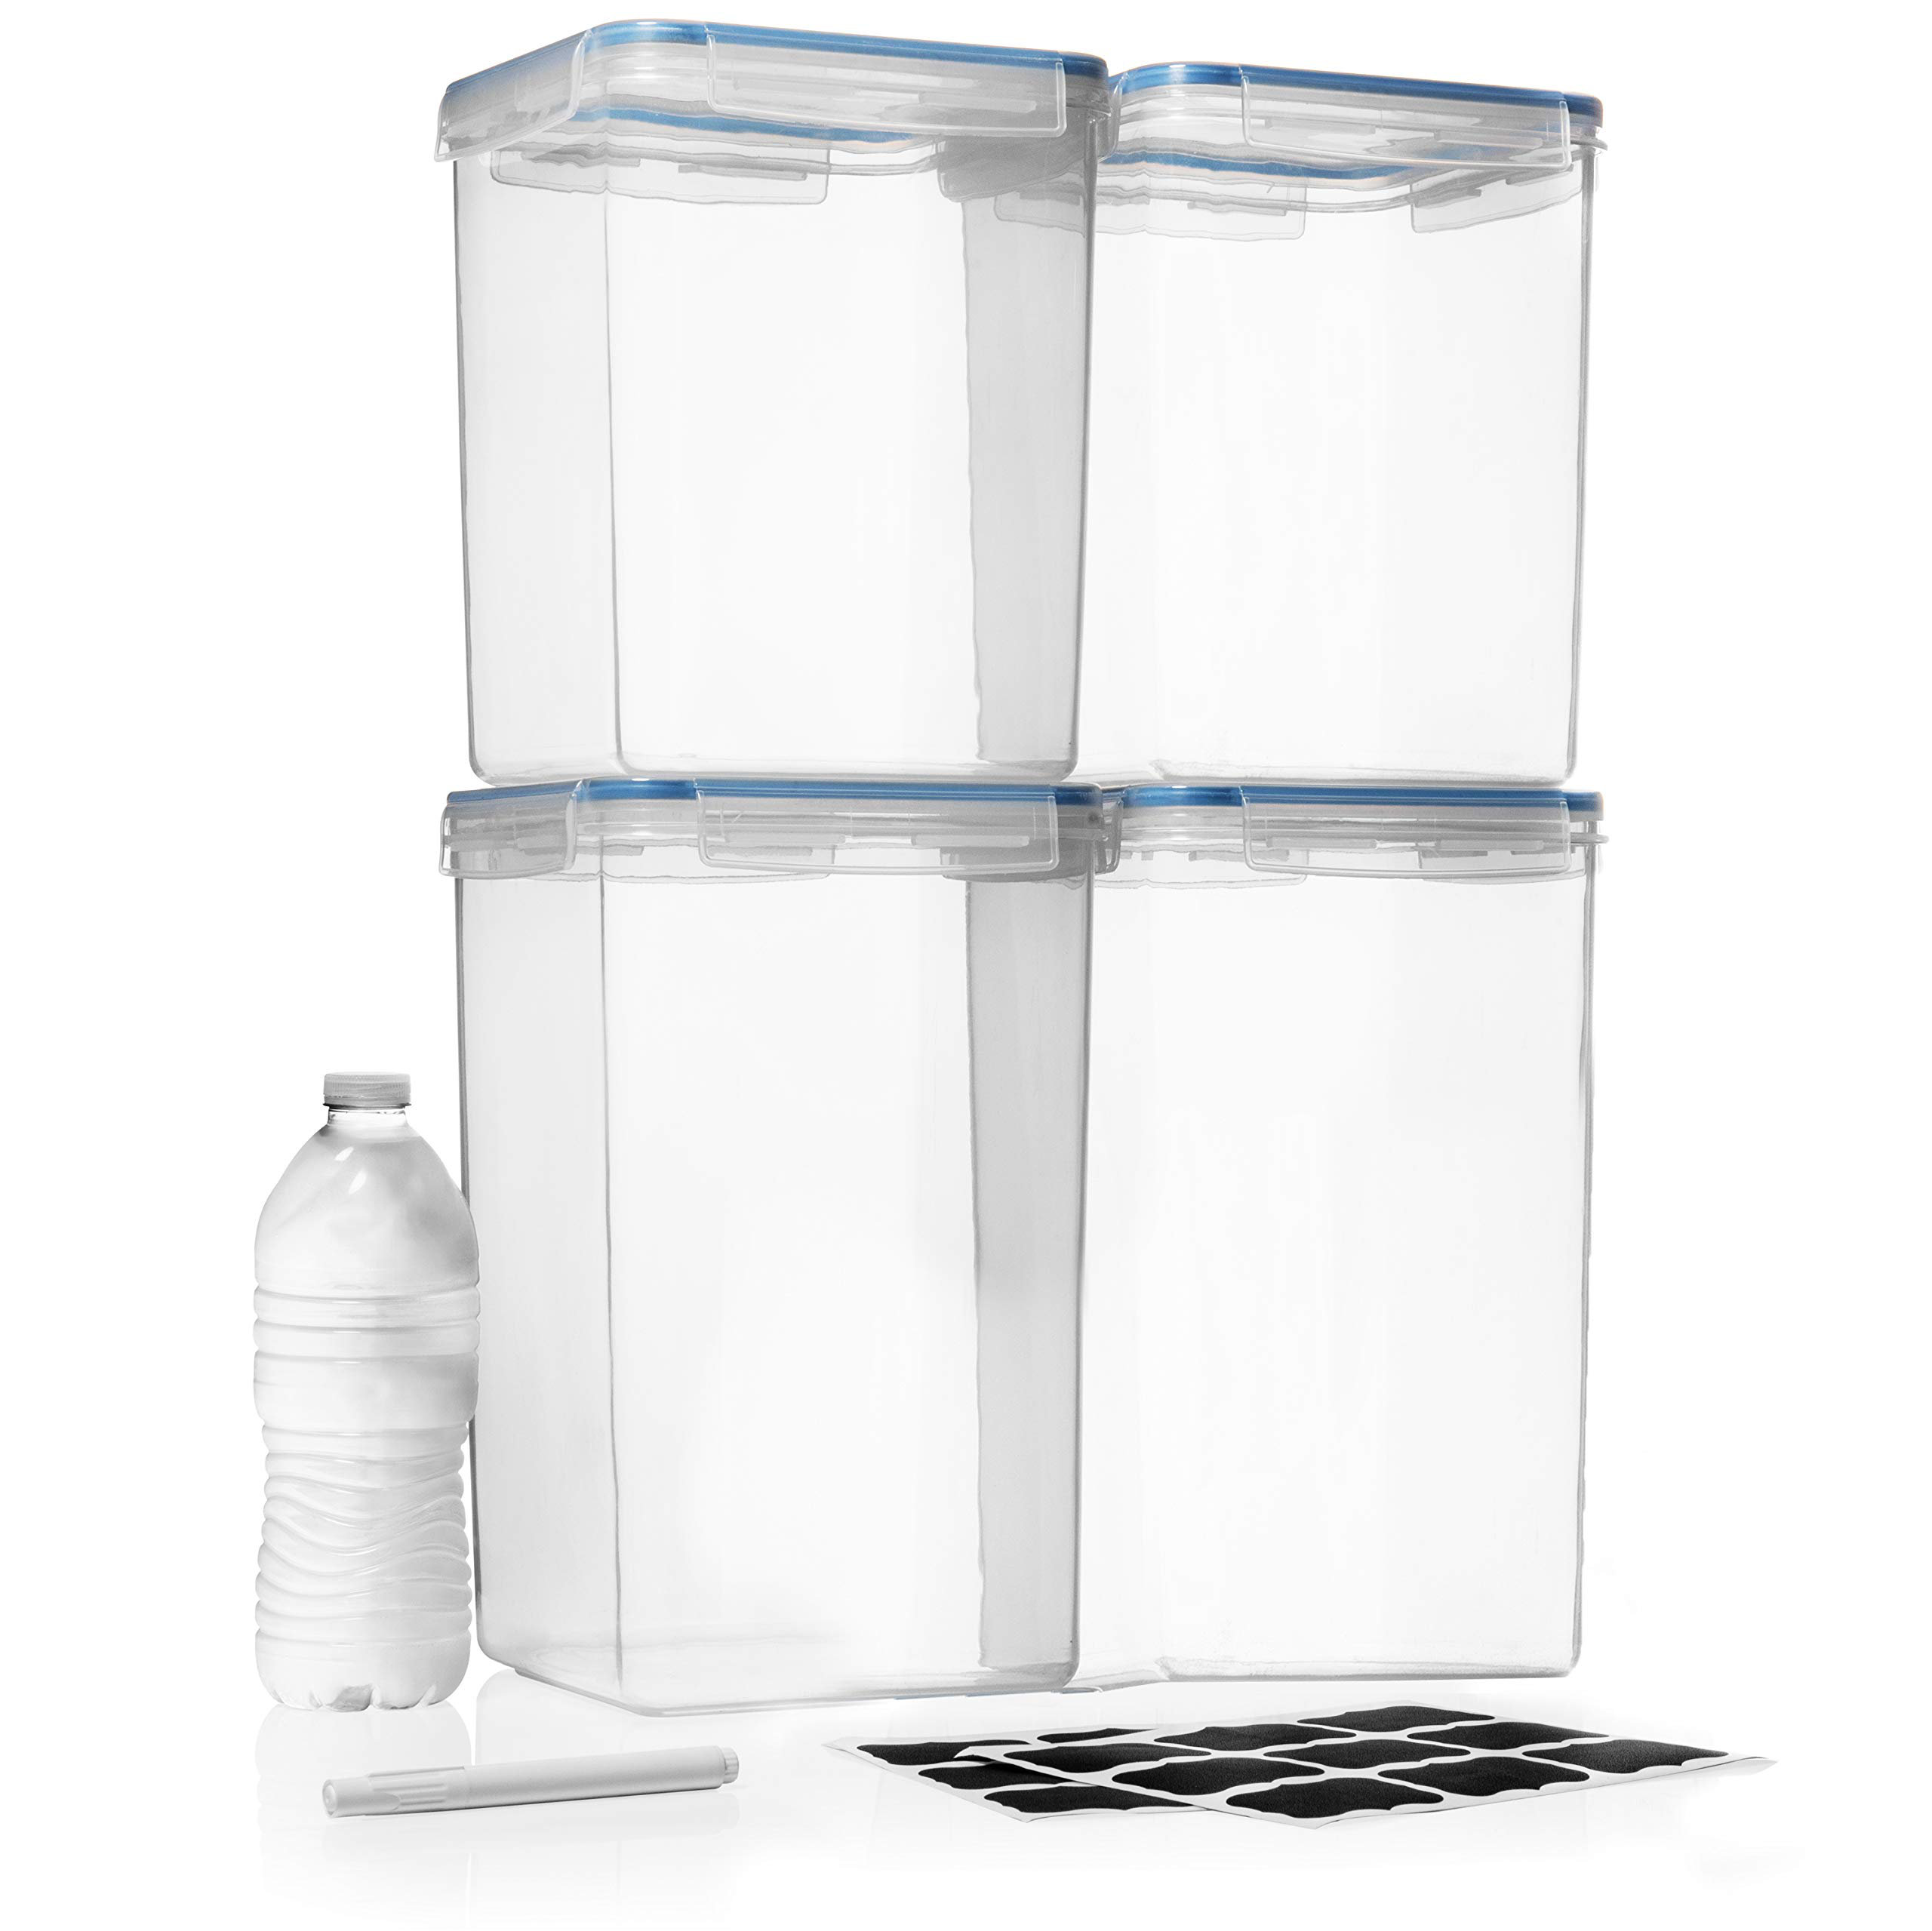 2 Pack Extra Large Airtight Food Storage Containers - 6.5L / 220 Oz Fl